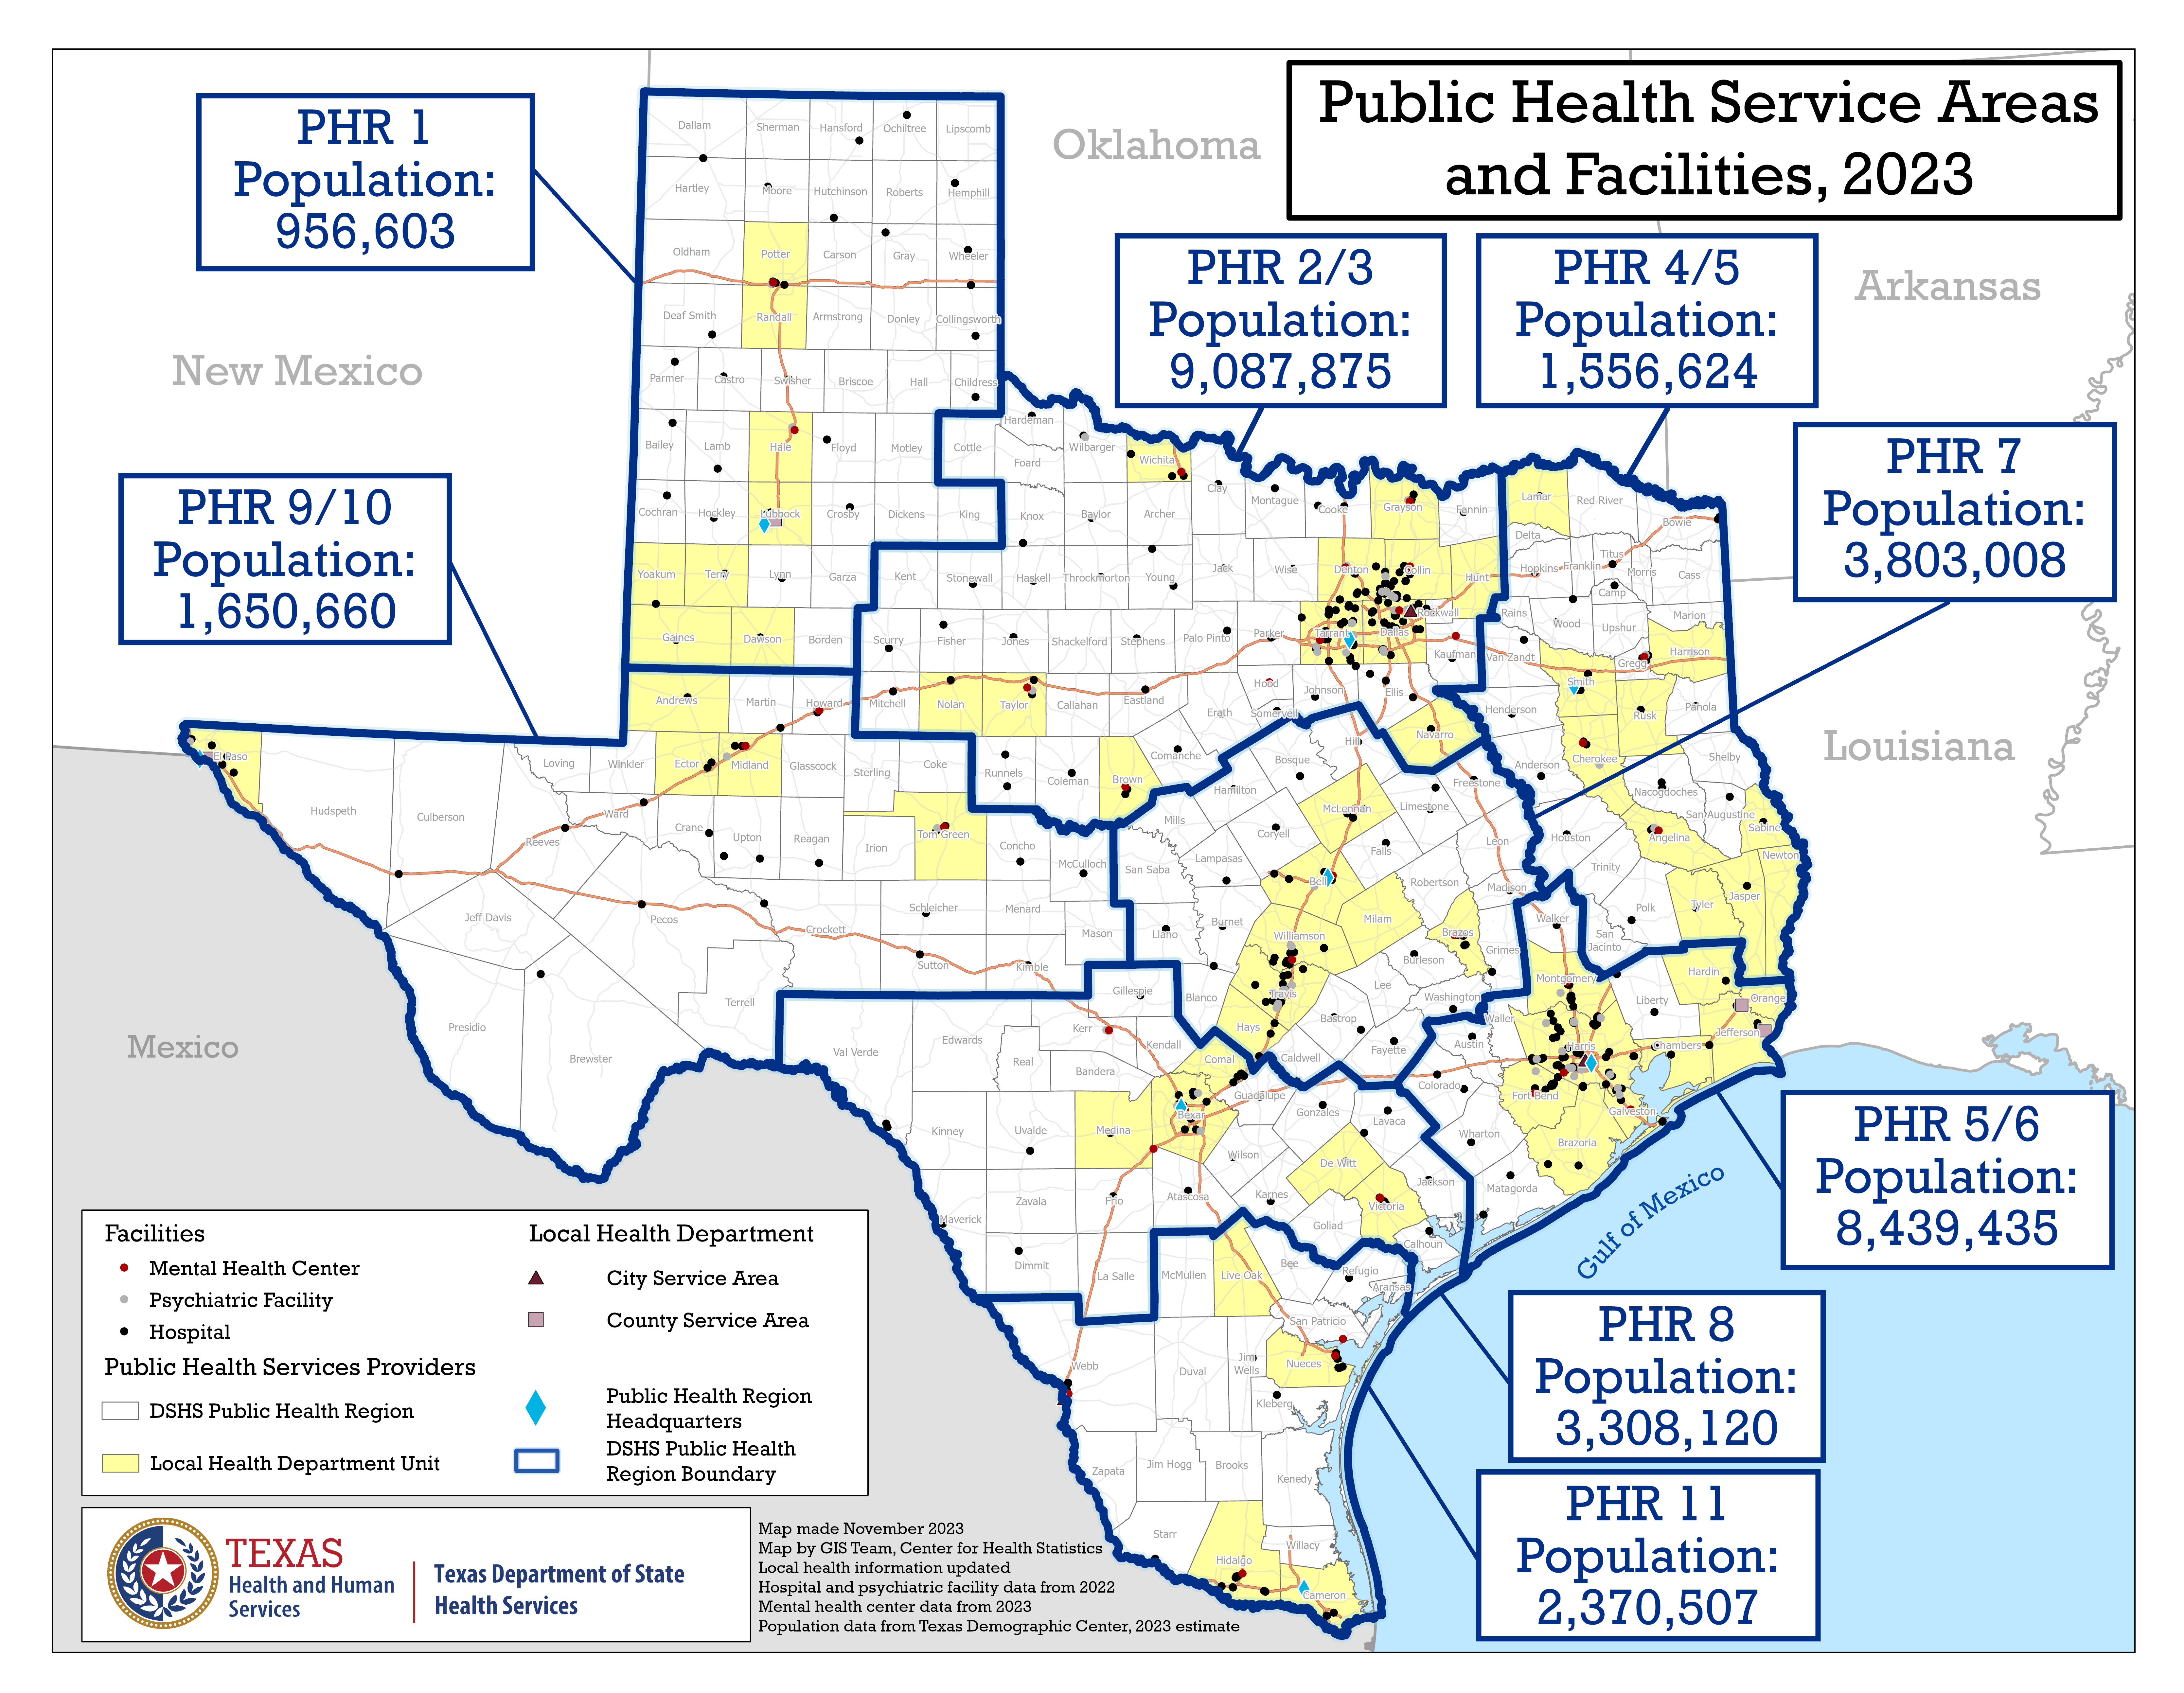 "Map showing Texas public health regions and counties, along with health facility locations and population estimates for 2023"